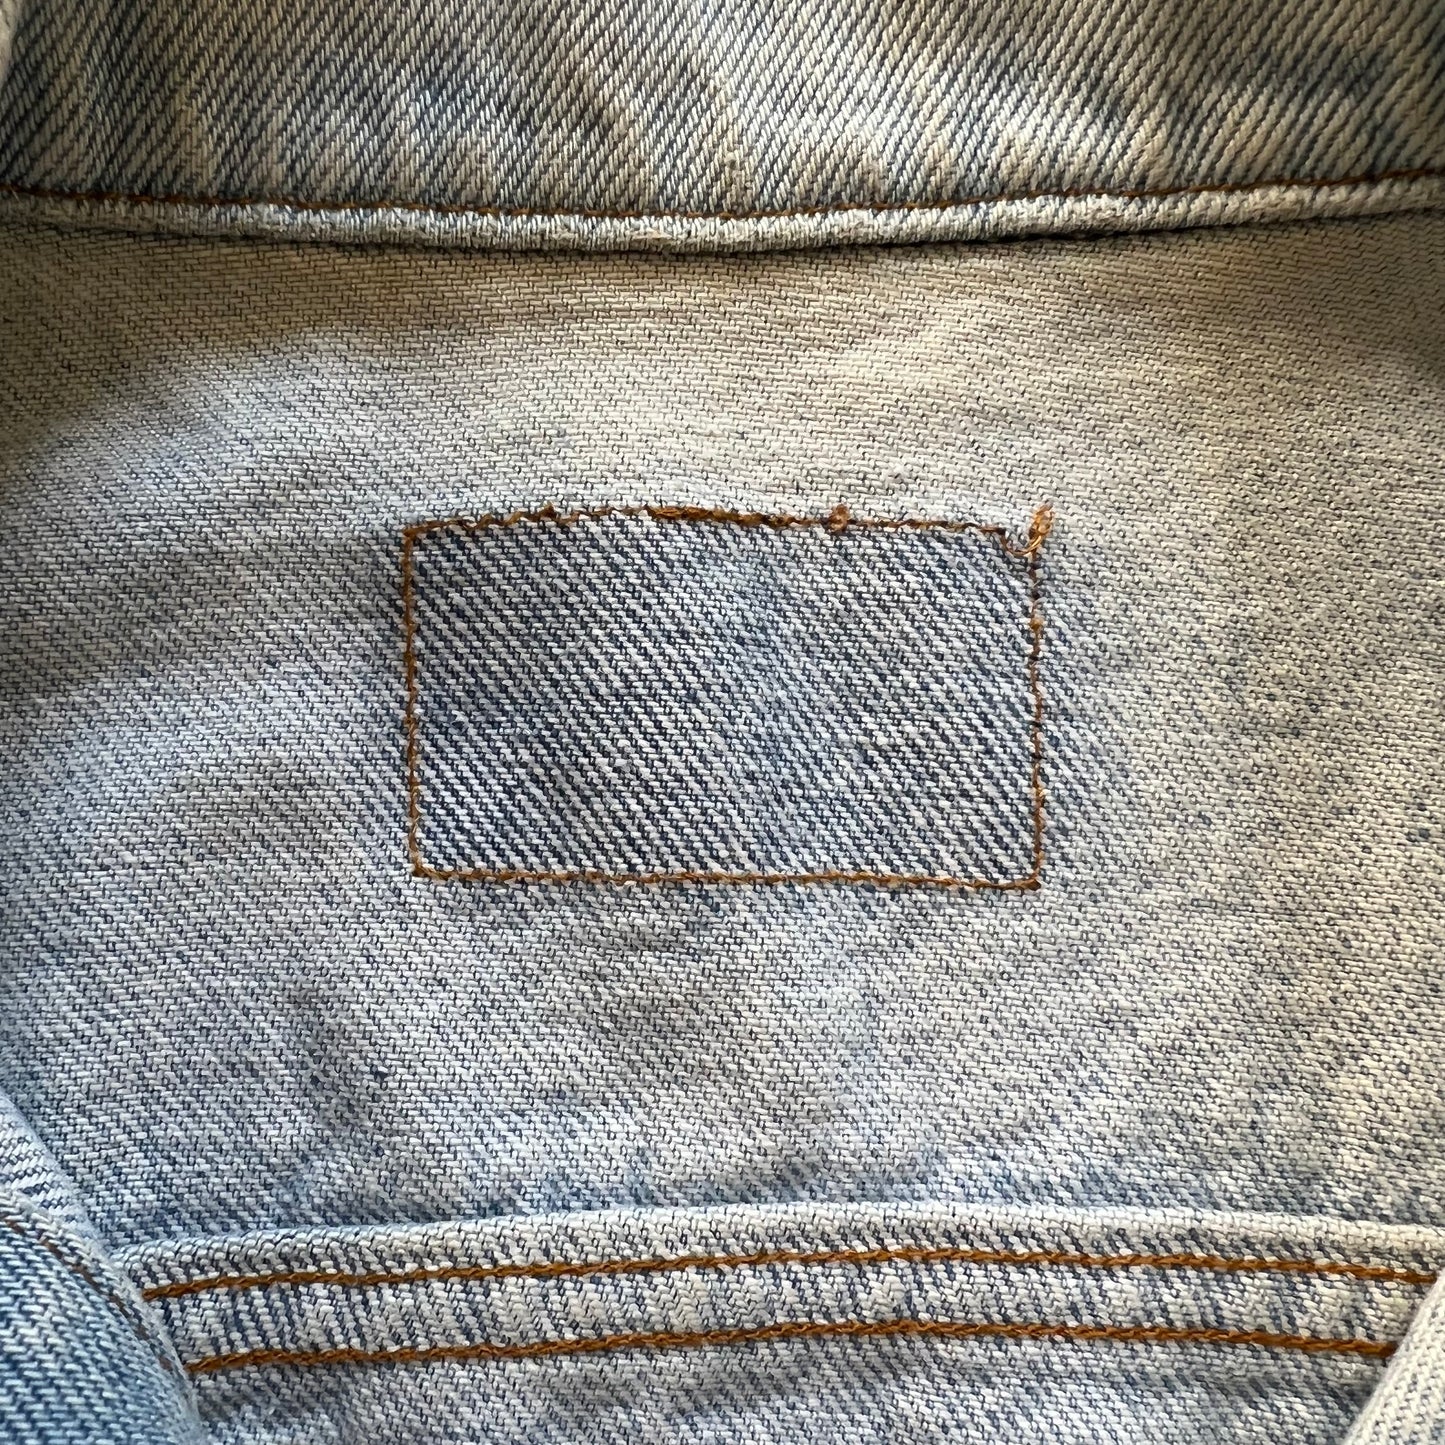 90's Levi's ICE WAHED DENIM TRUCKER JACKET "MADE IN USA"